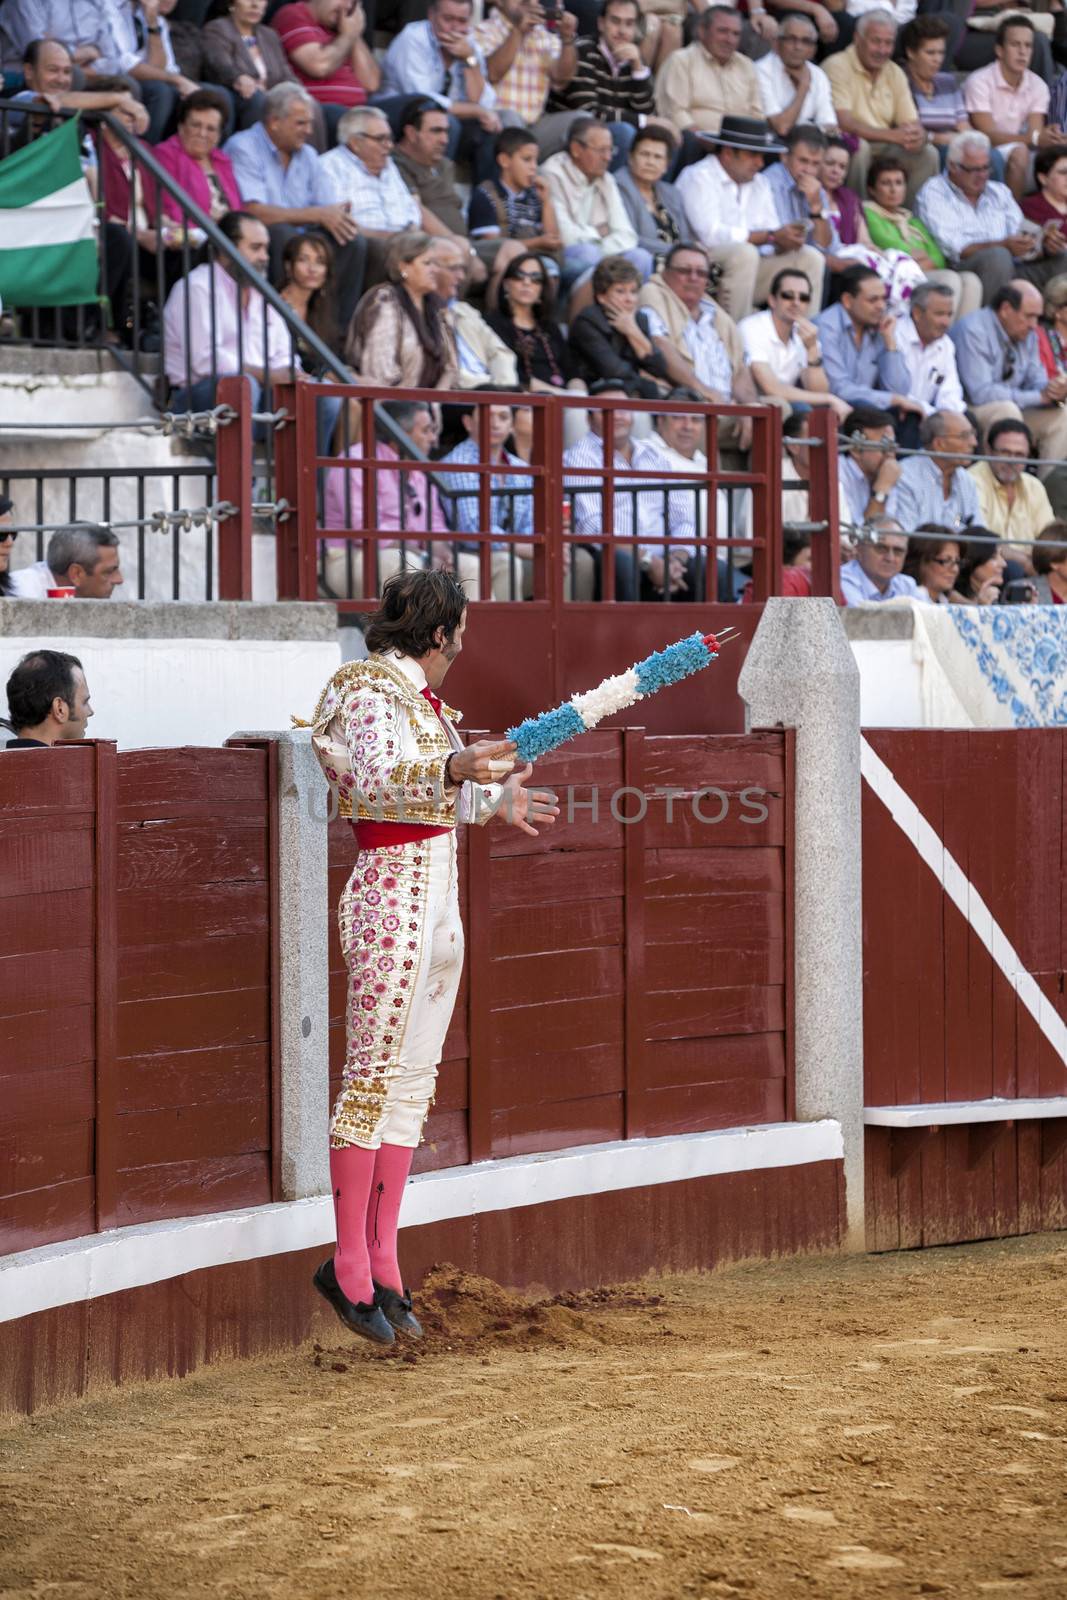 Pozoblanco, Cordoba province, SPAIN - 24 september 2010: Spanish bullfighter Juan Jose Padilla jumping and suspended in the air with two banderillas in the right hand looking at the bull in the bullring of Pozoblanco, on the day of the 25th anniversary of the death of the famous spanish bullfighter Paquirri, Cordoba province, Andalusia, Spain